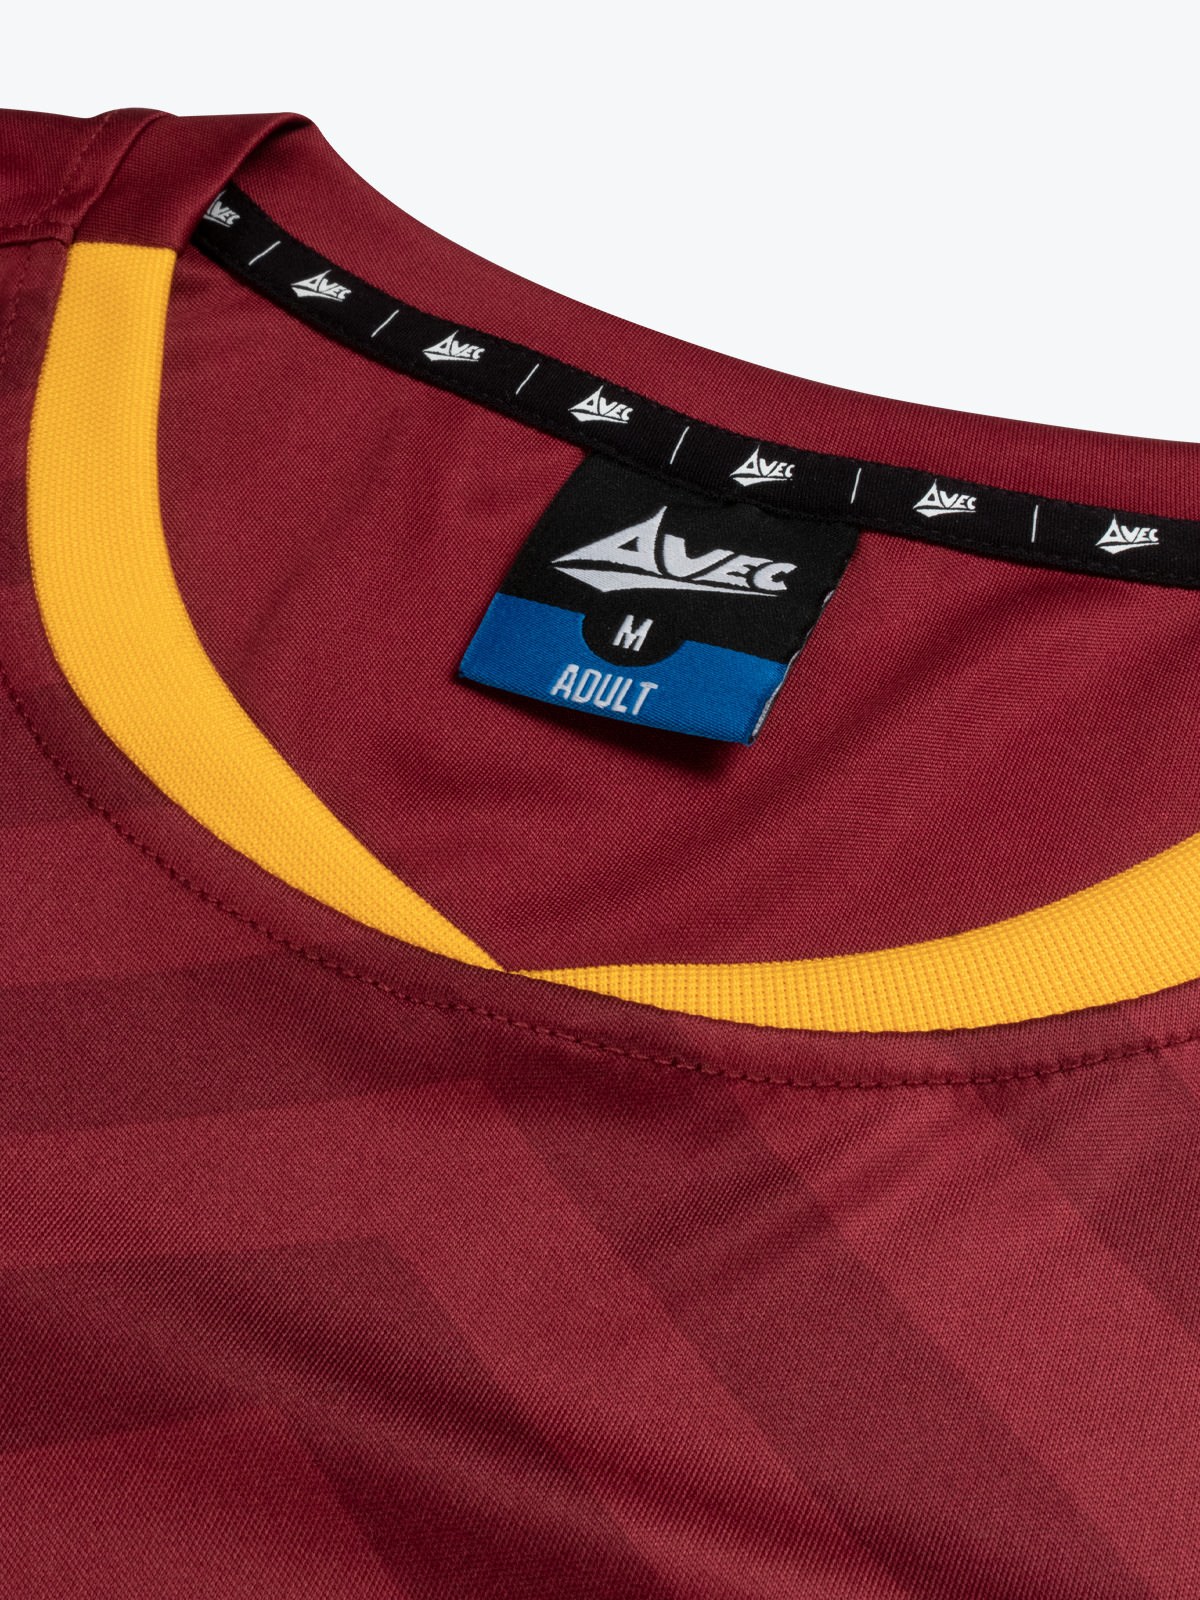 picture of team id pro jersey - claret